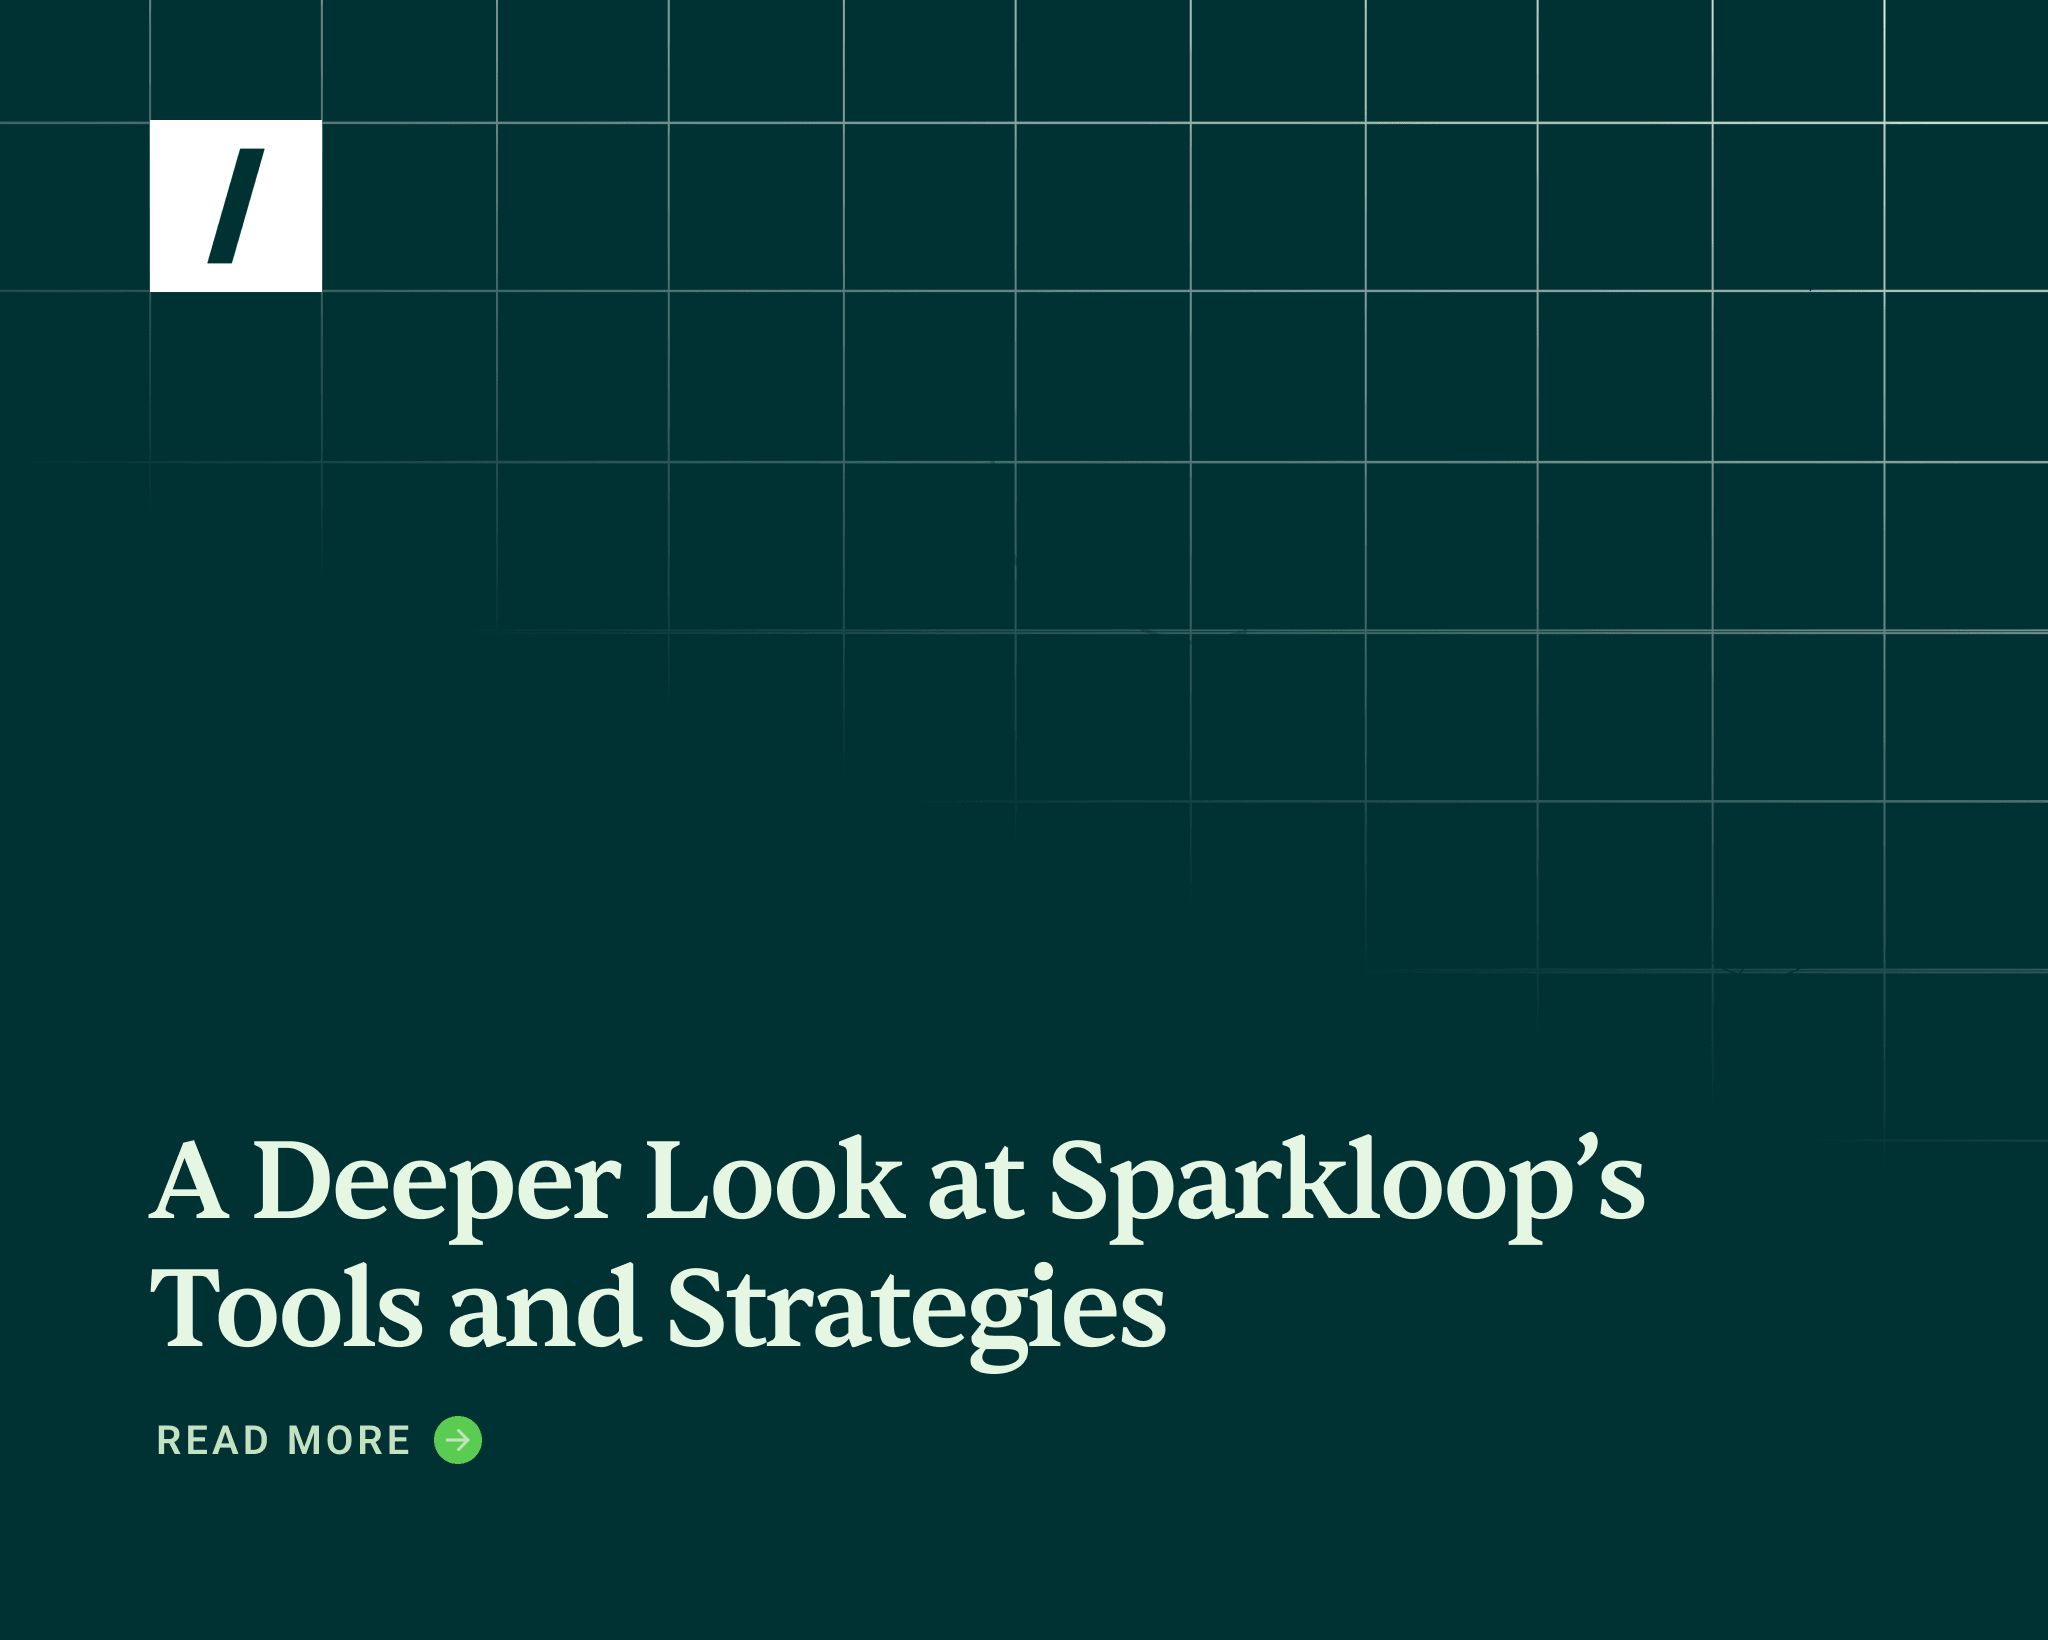 Cover image for "Refer, Reward, Repeat: Using SparkLoop for Success" contains text on green background: "A Deeper Look at Sparkloop's Tools and Strategies"